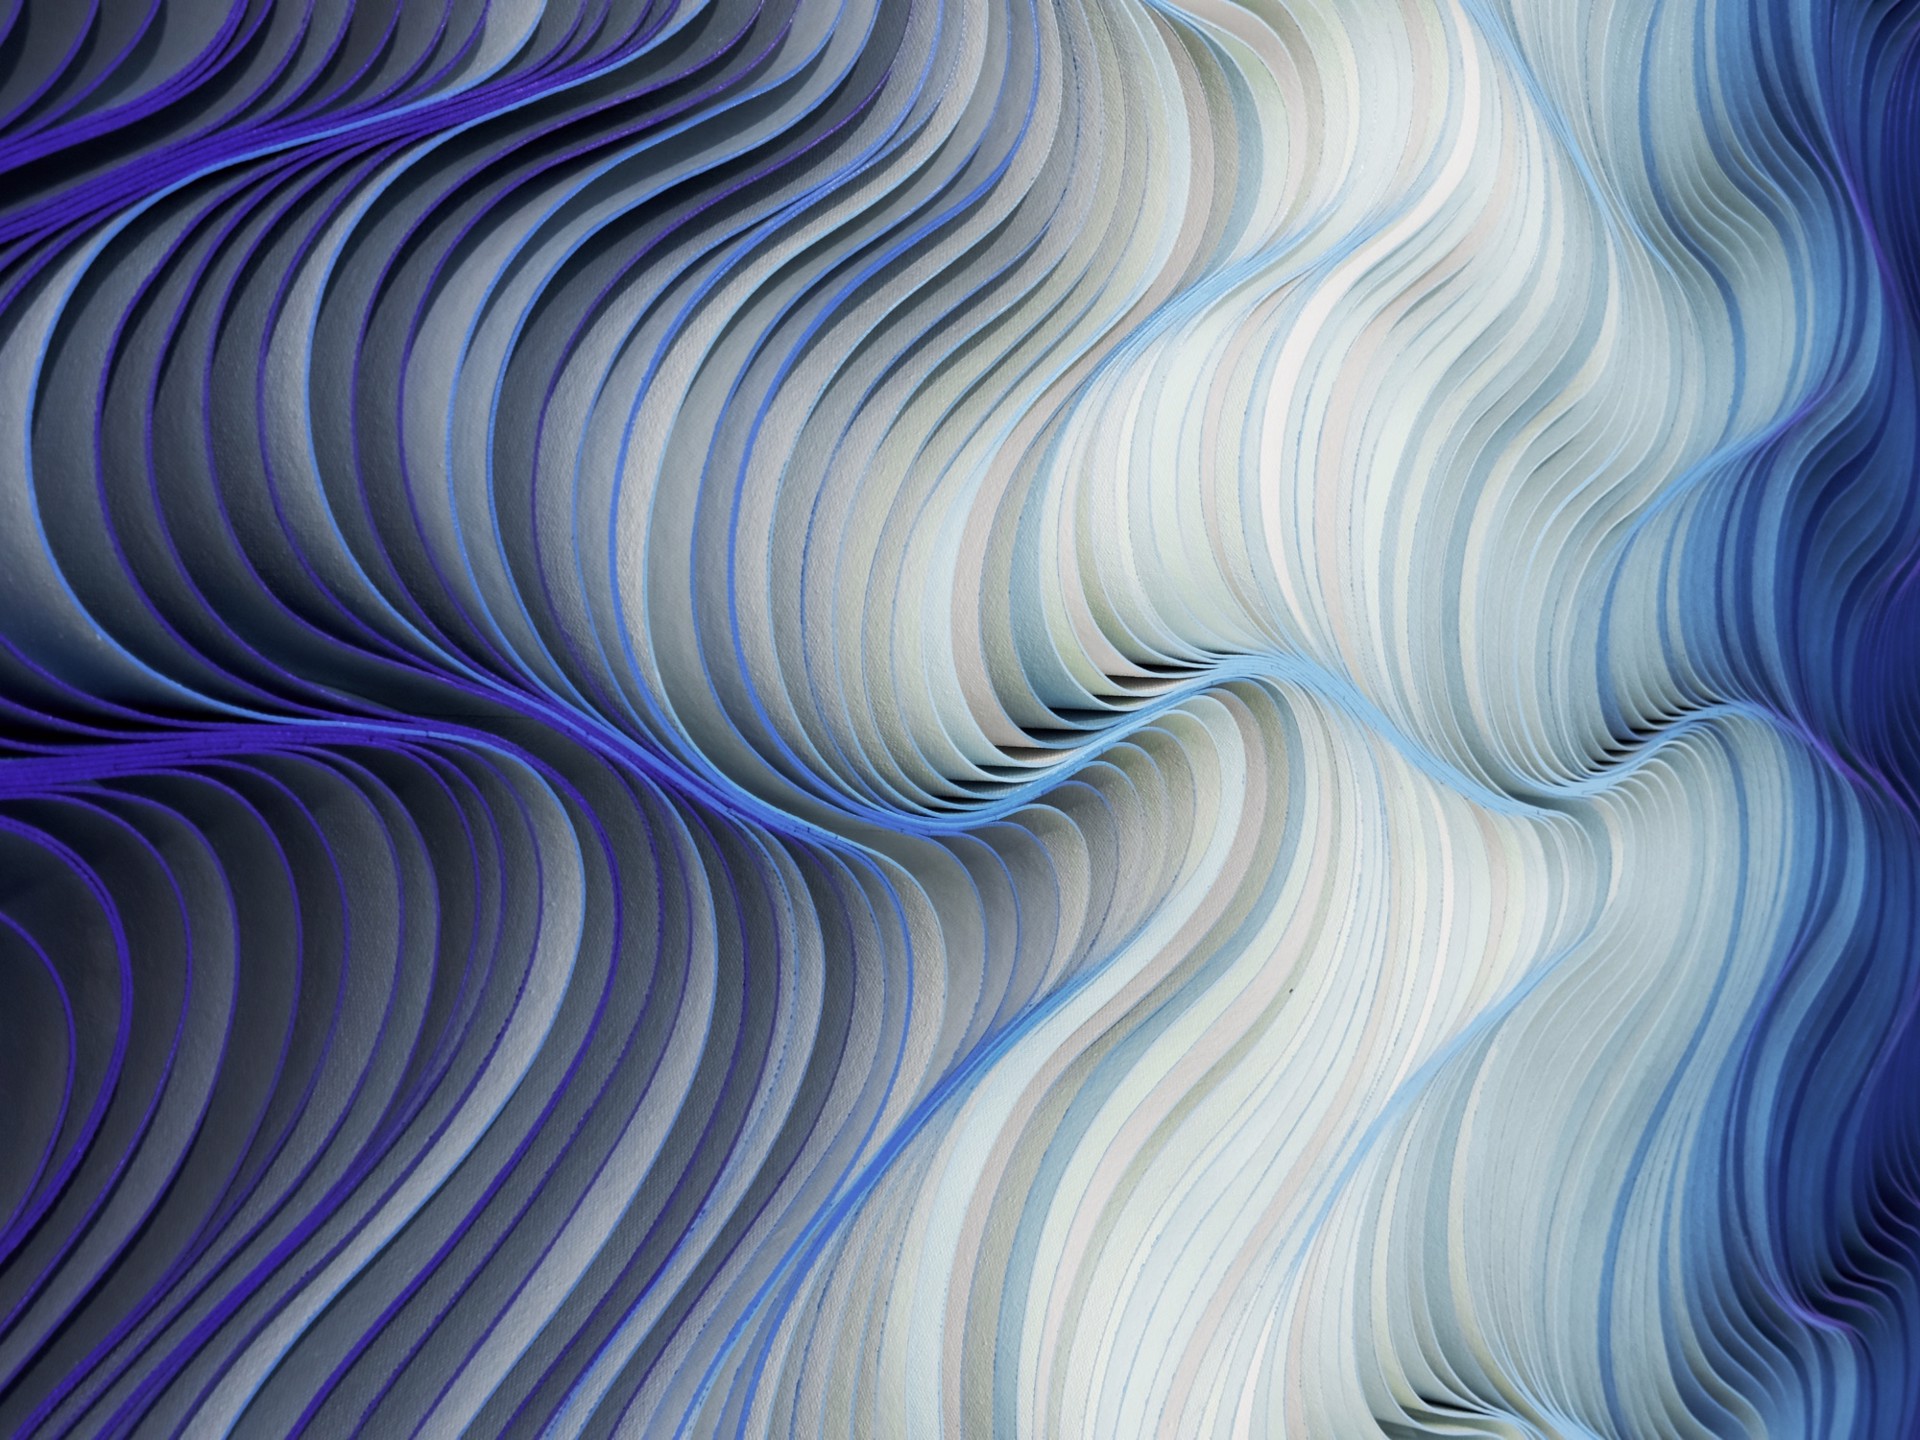 Wind and Wave by Stallman Studio